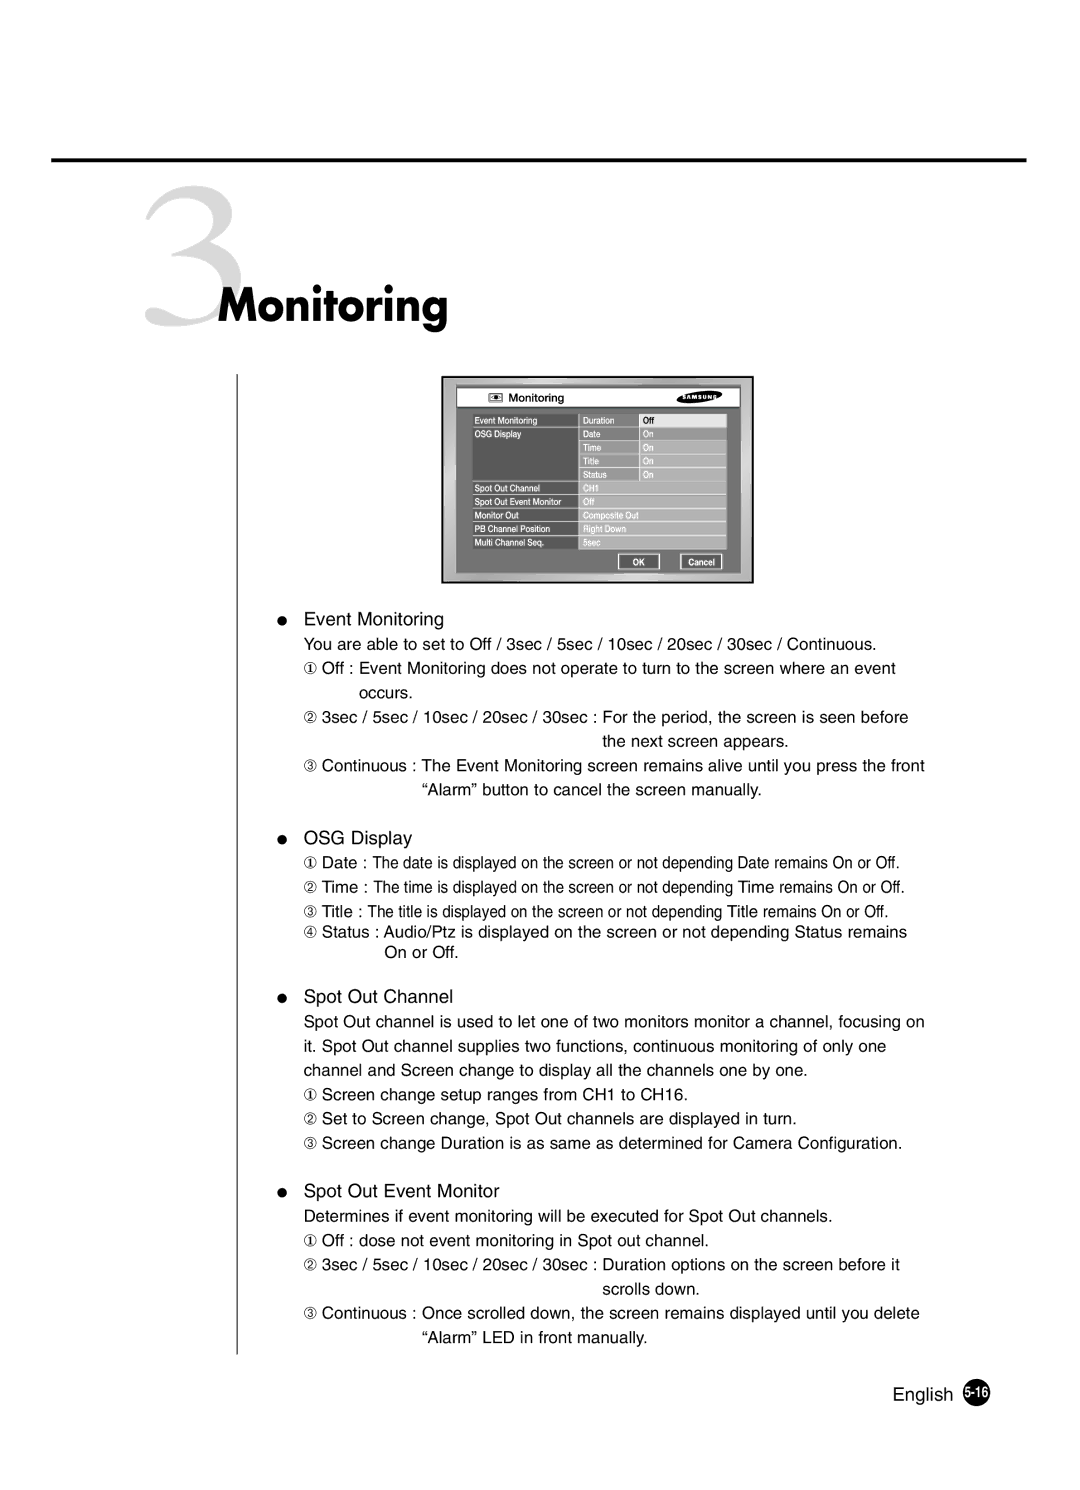 Samsung SHR-4160P manual 3Monitoring, Event Monitoring, OSG Display, Spot Out Channel, Spot Out Event Monitor 